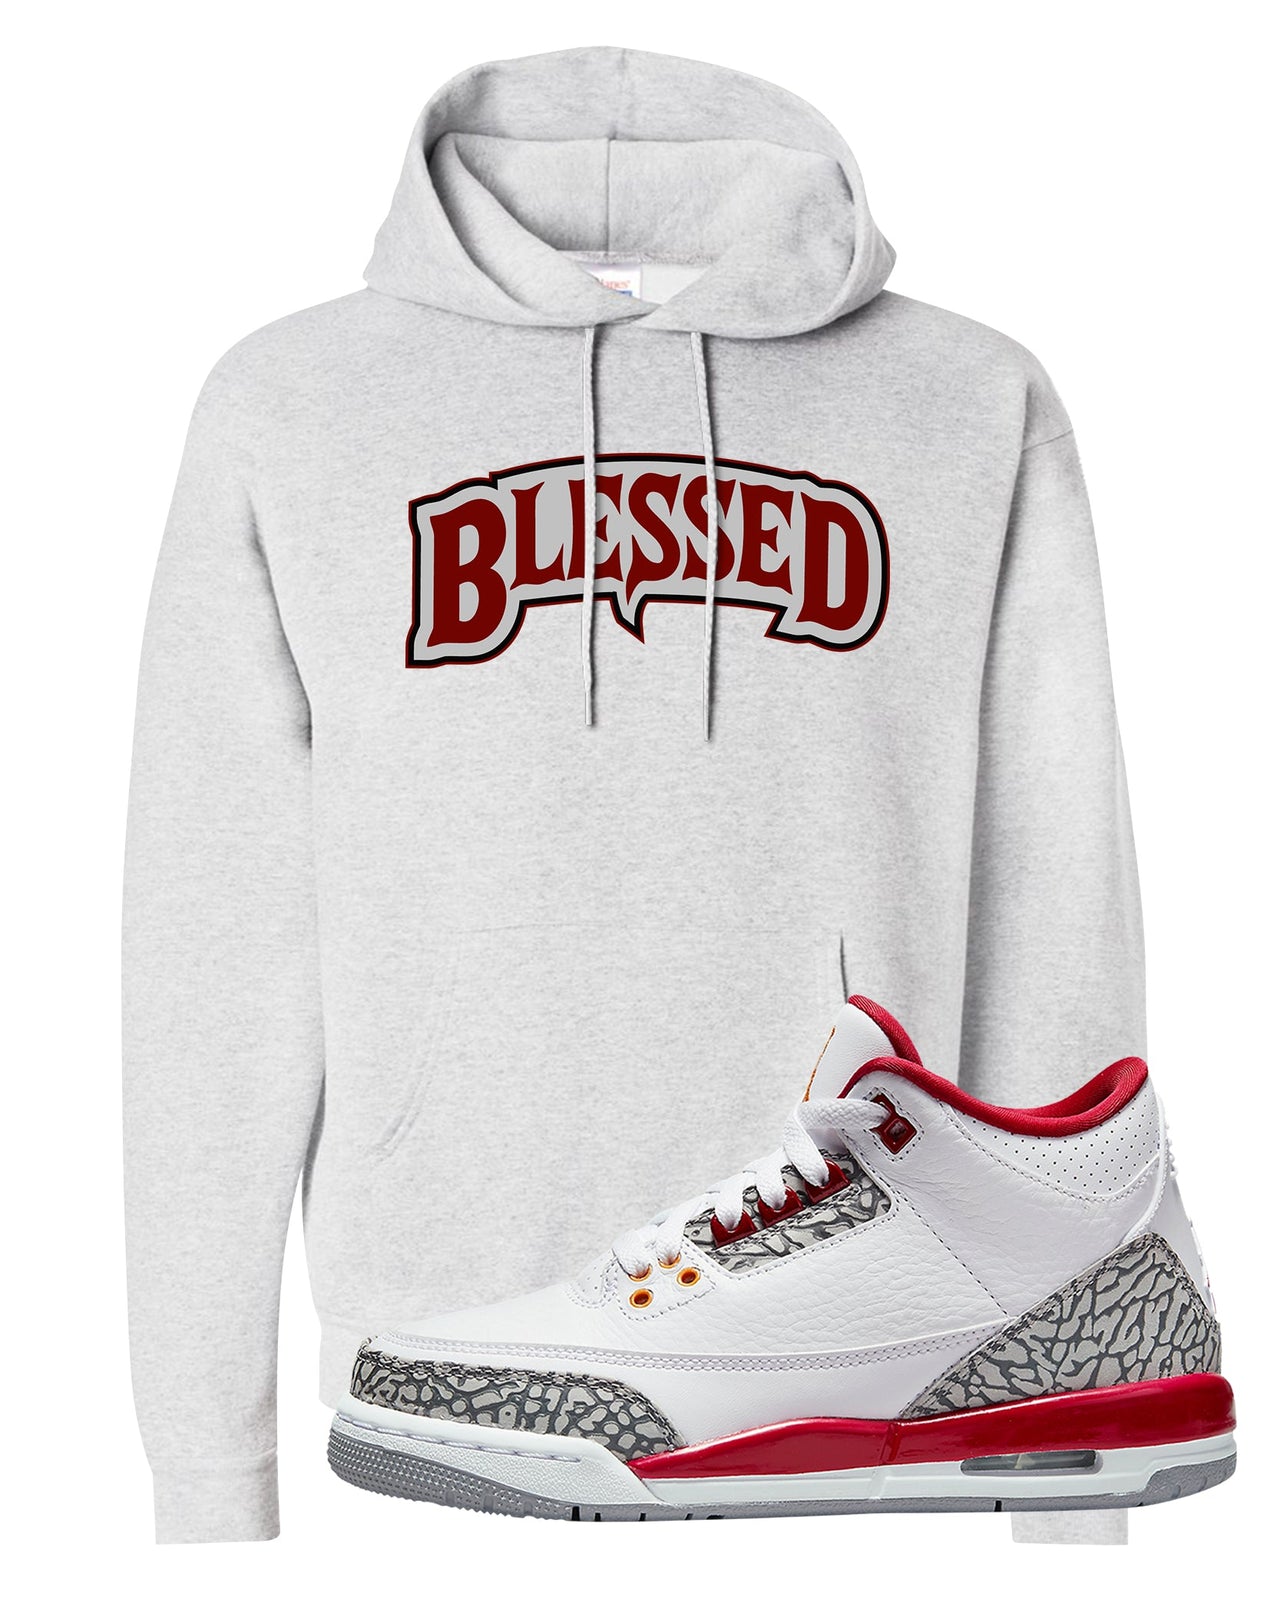 Cardinal Red 3s Hoodie | Blessed Arch, Ash